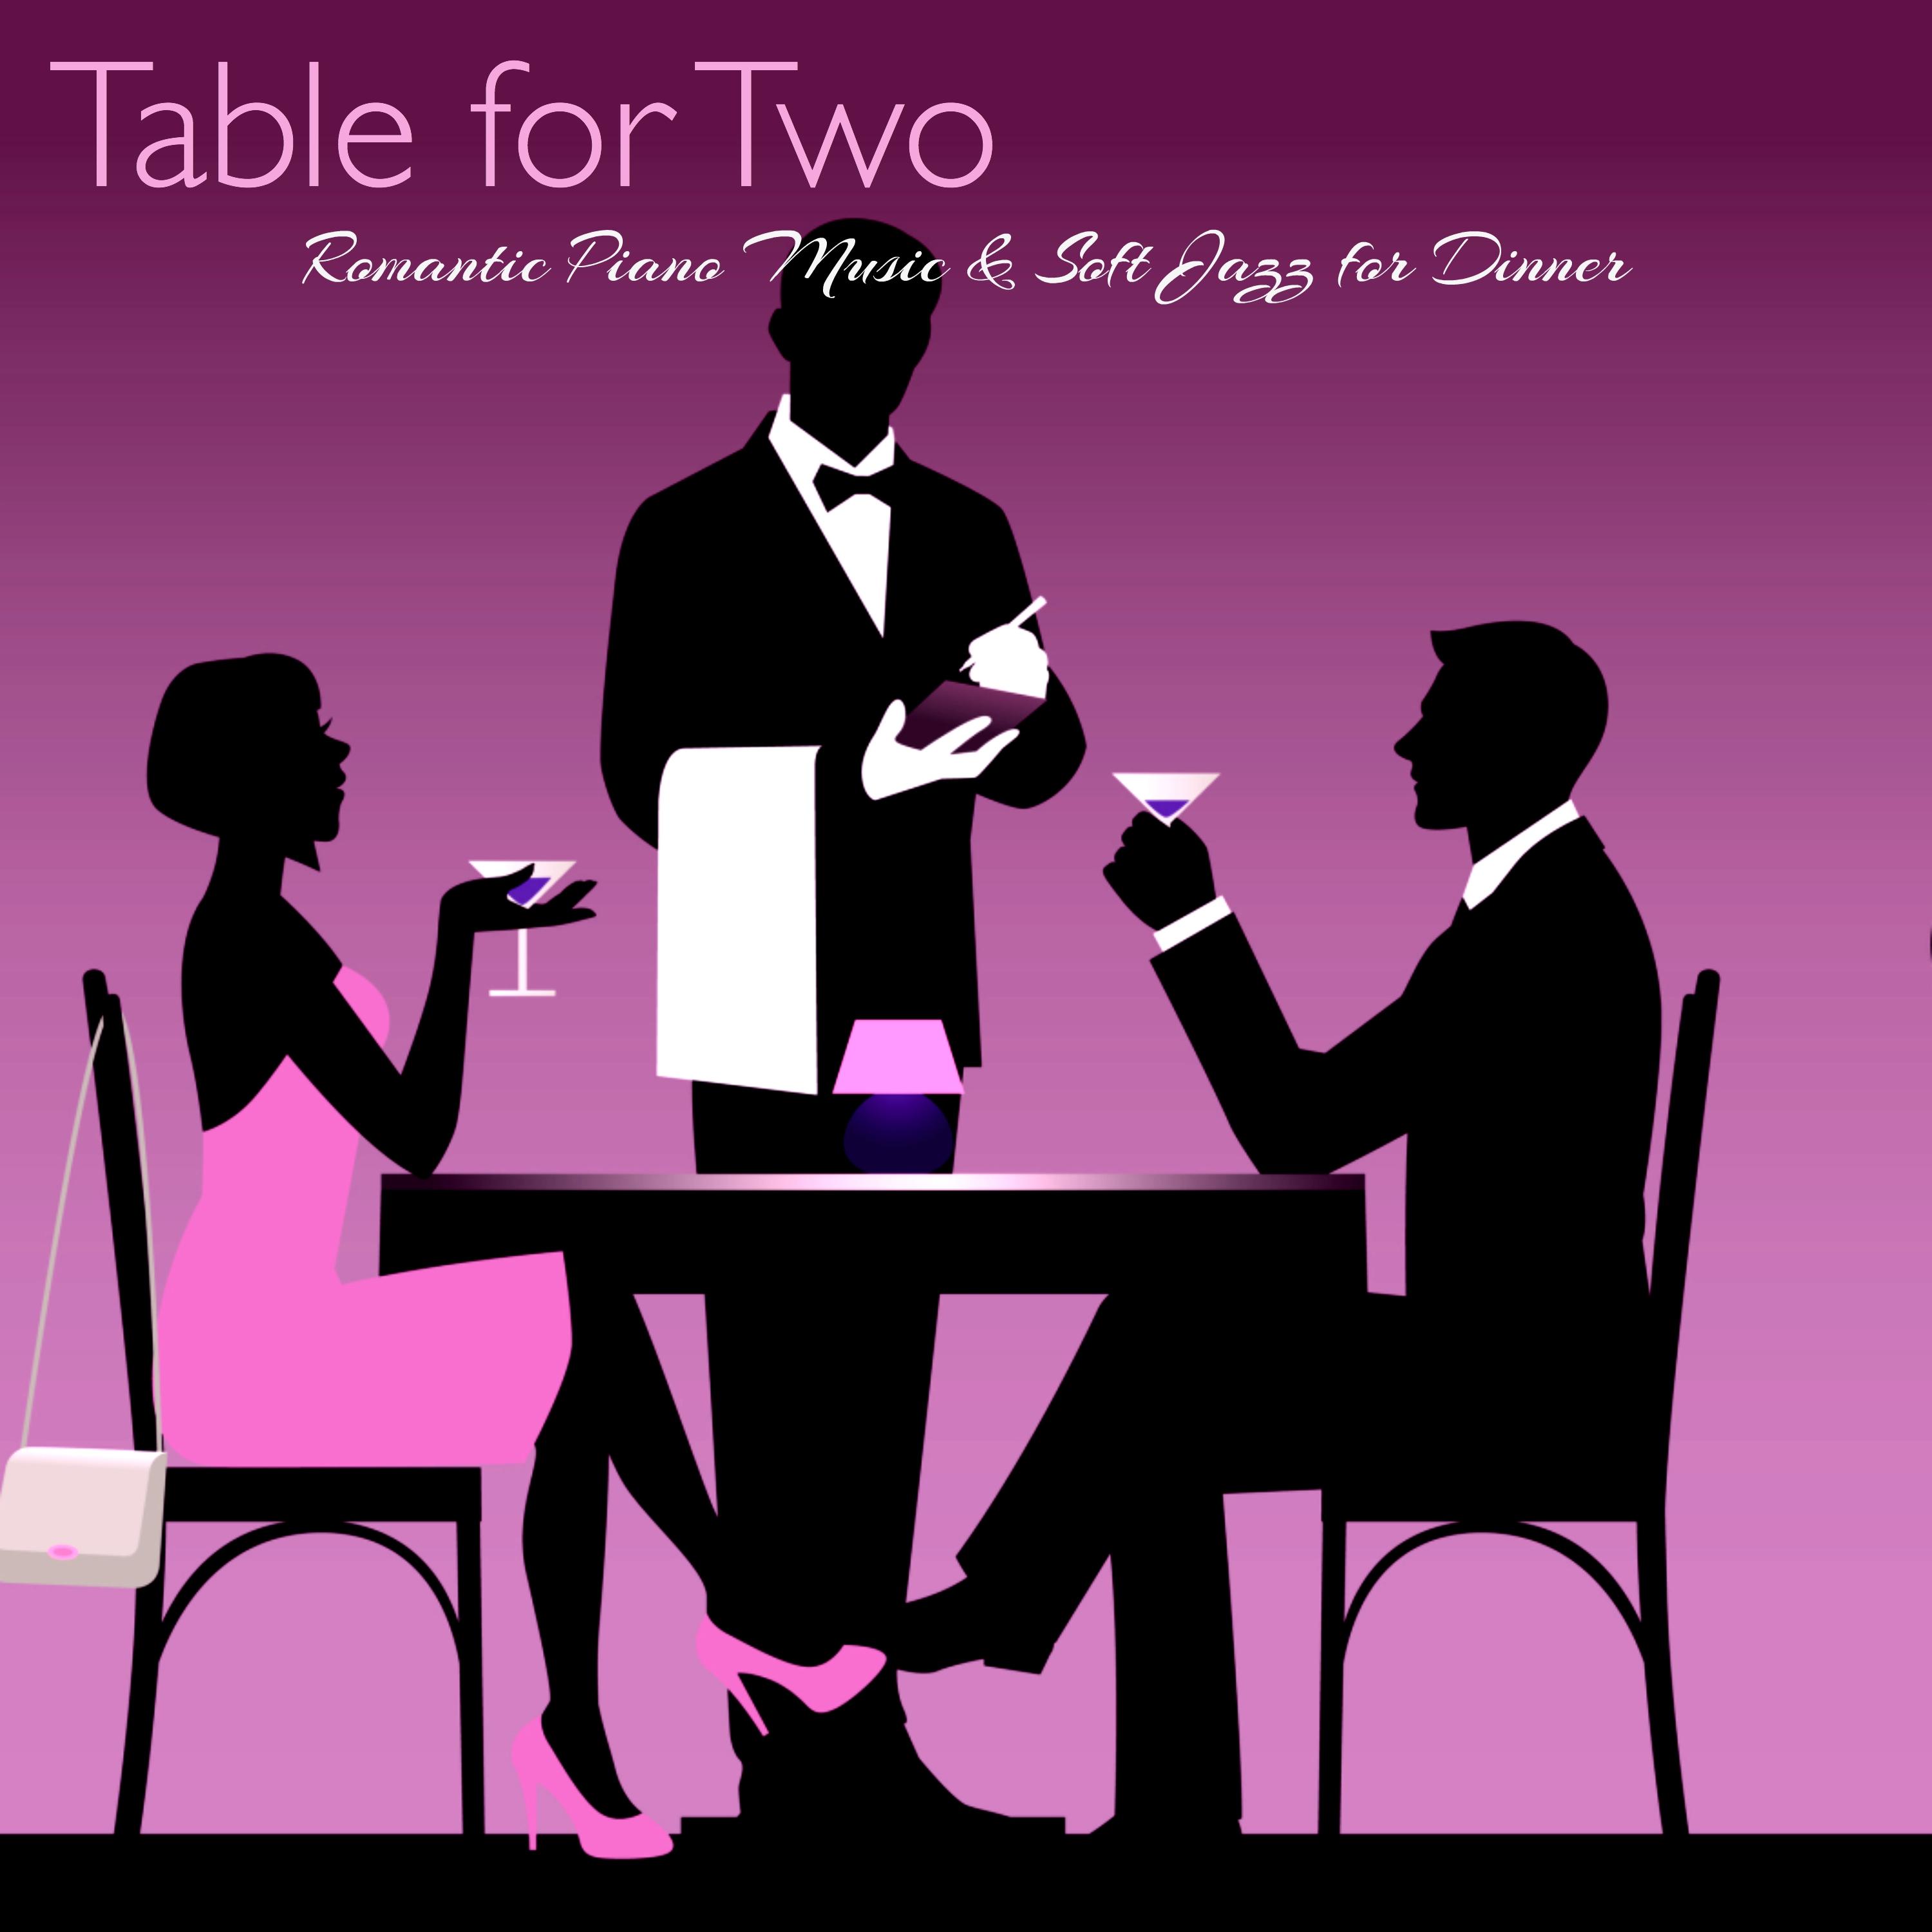 Table for Two – Romantic Piano Music & Soft Jazz for Dinner, Instrumental Background Restautant Music, Cocktails & Piano Bar Romantic Nights